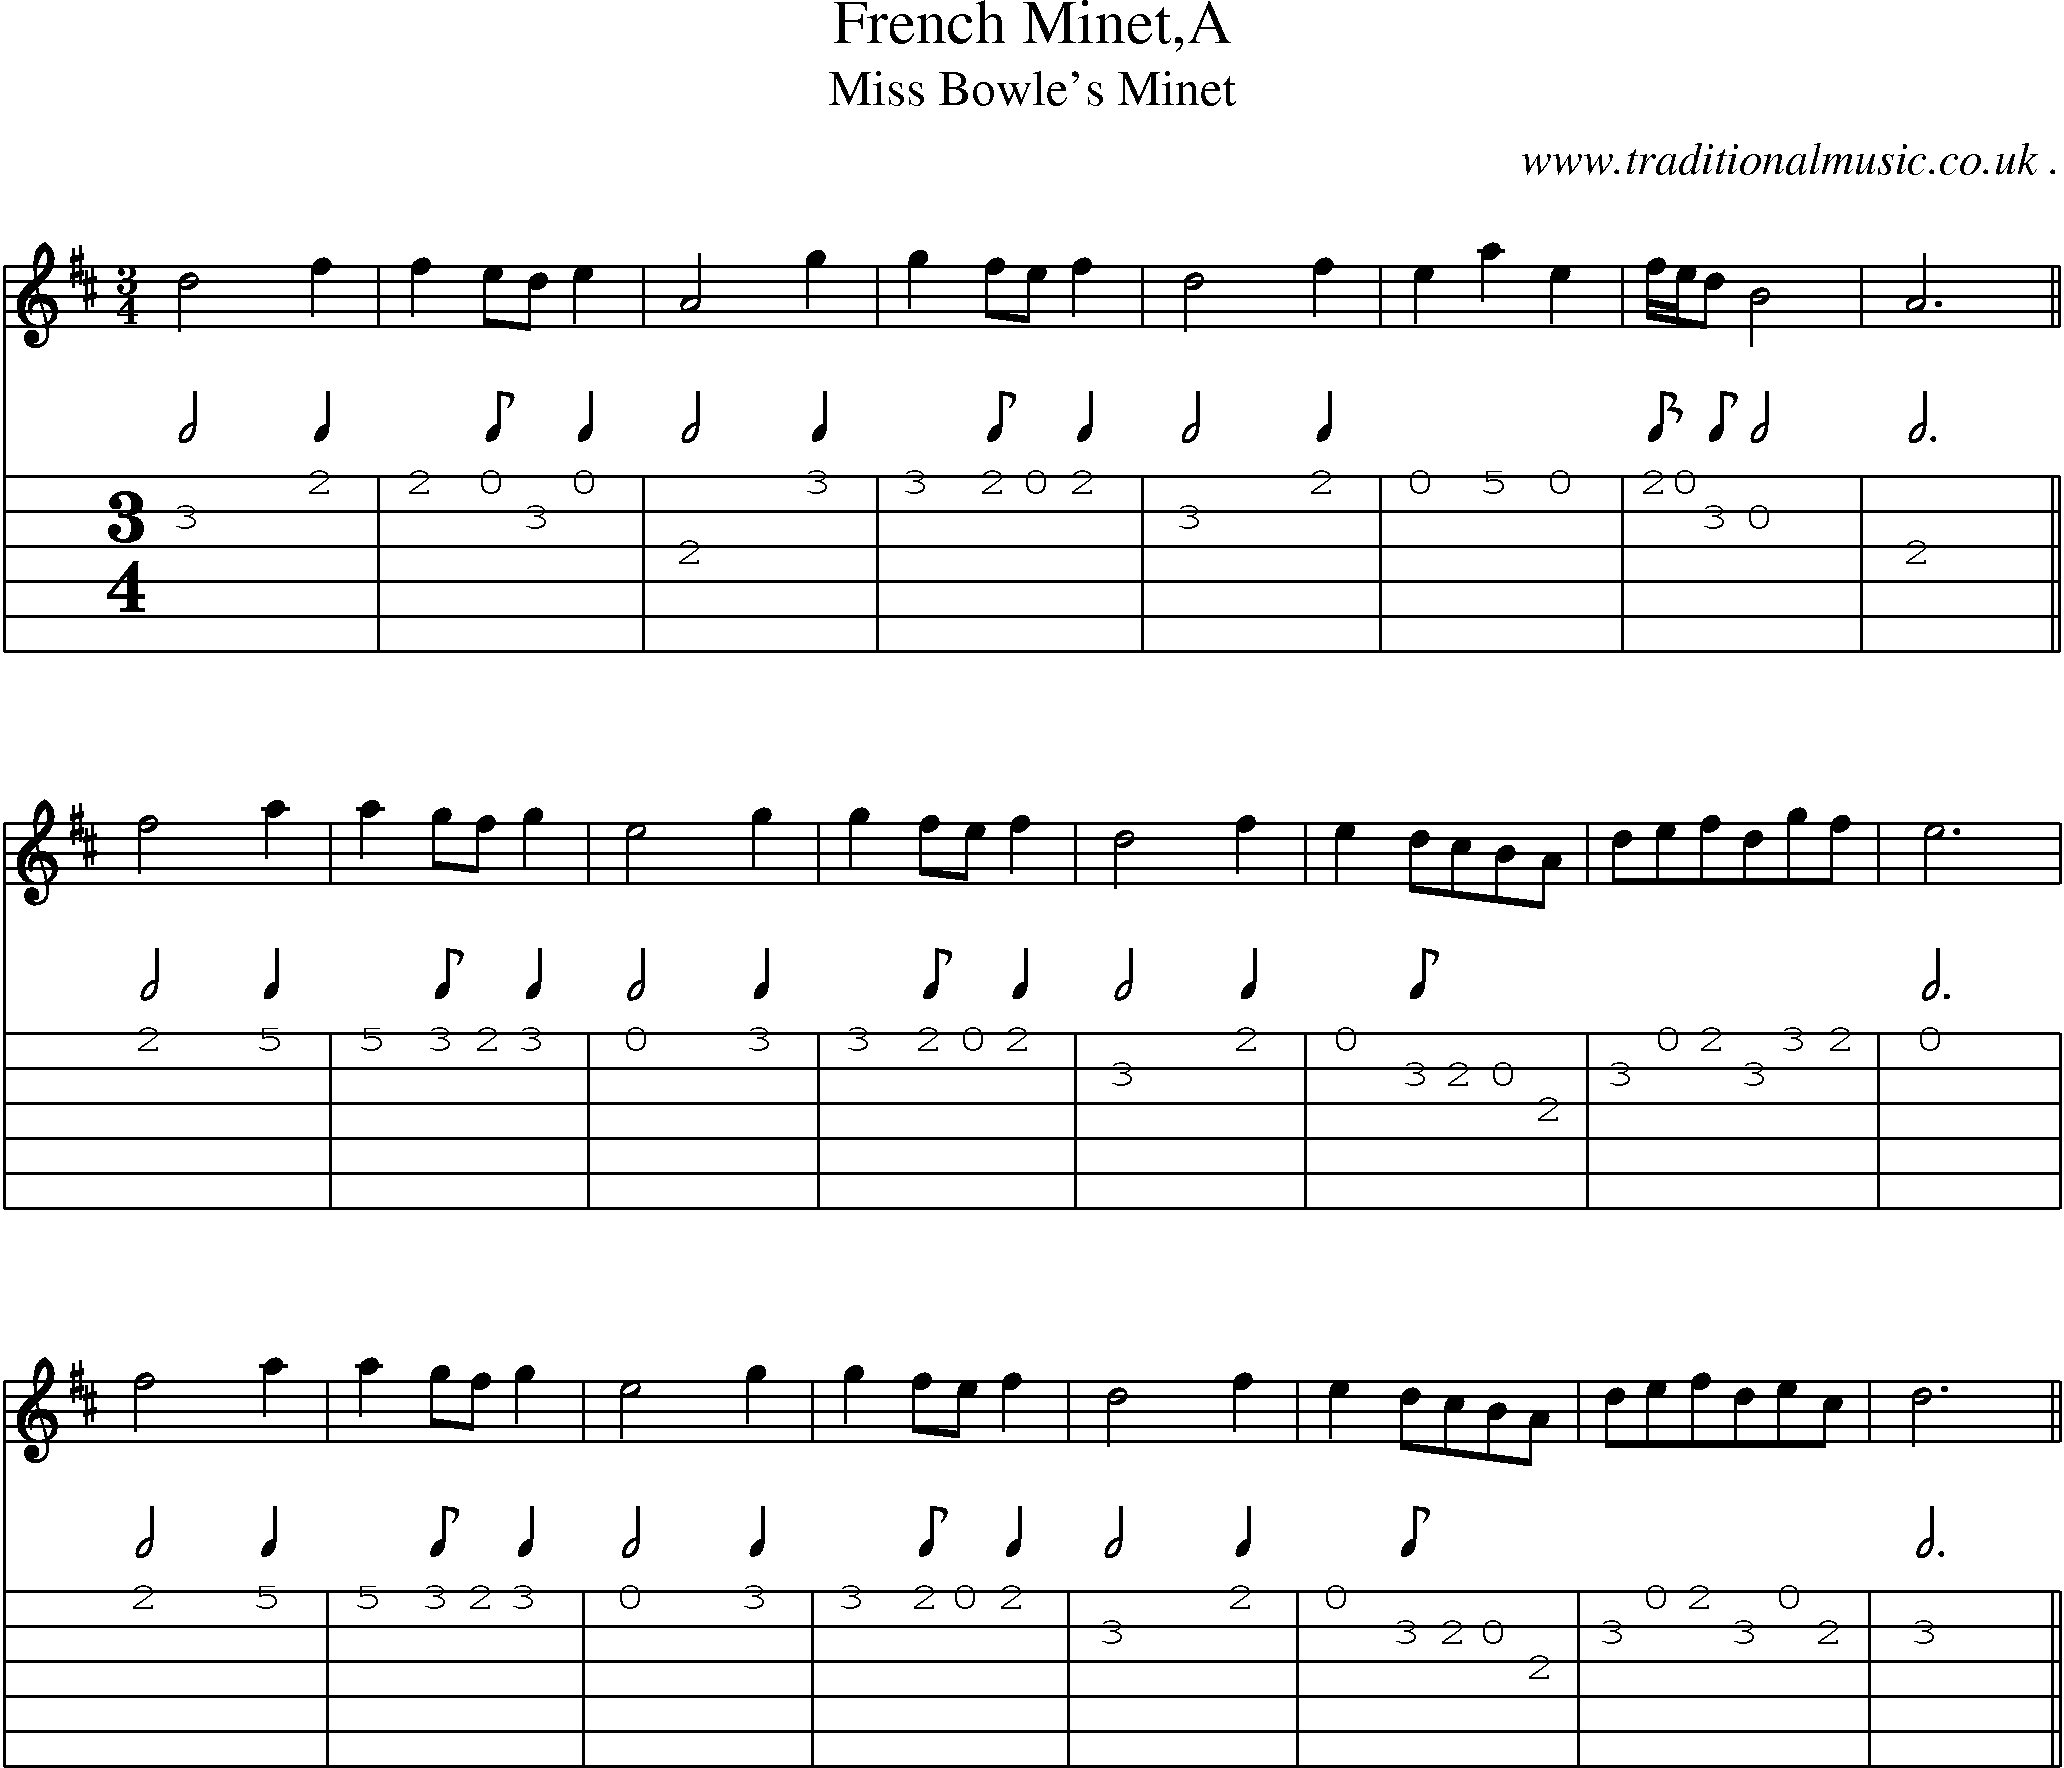 Sheet-Music and Guitar Tabs for French Mineta